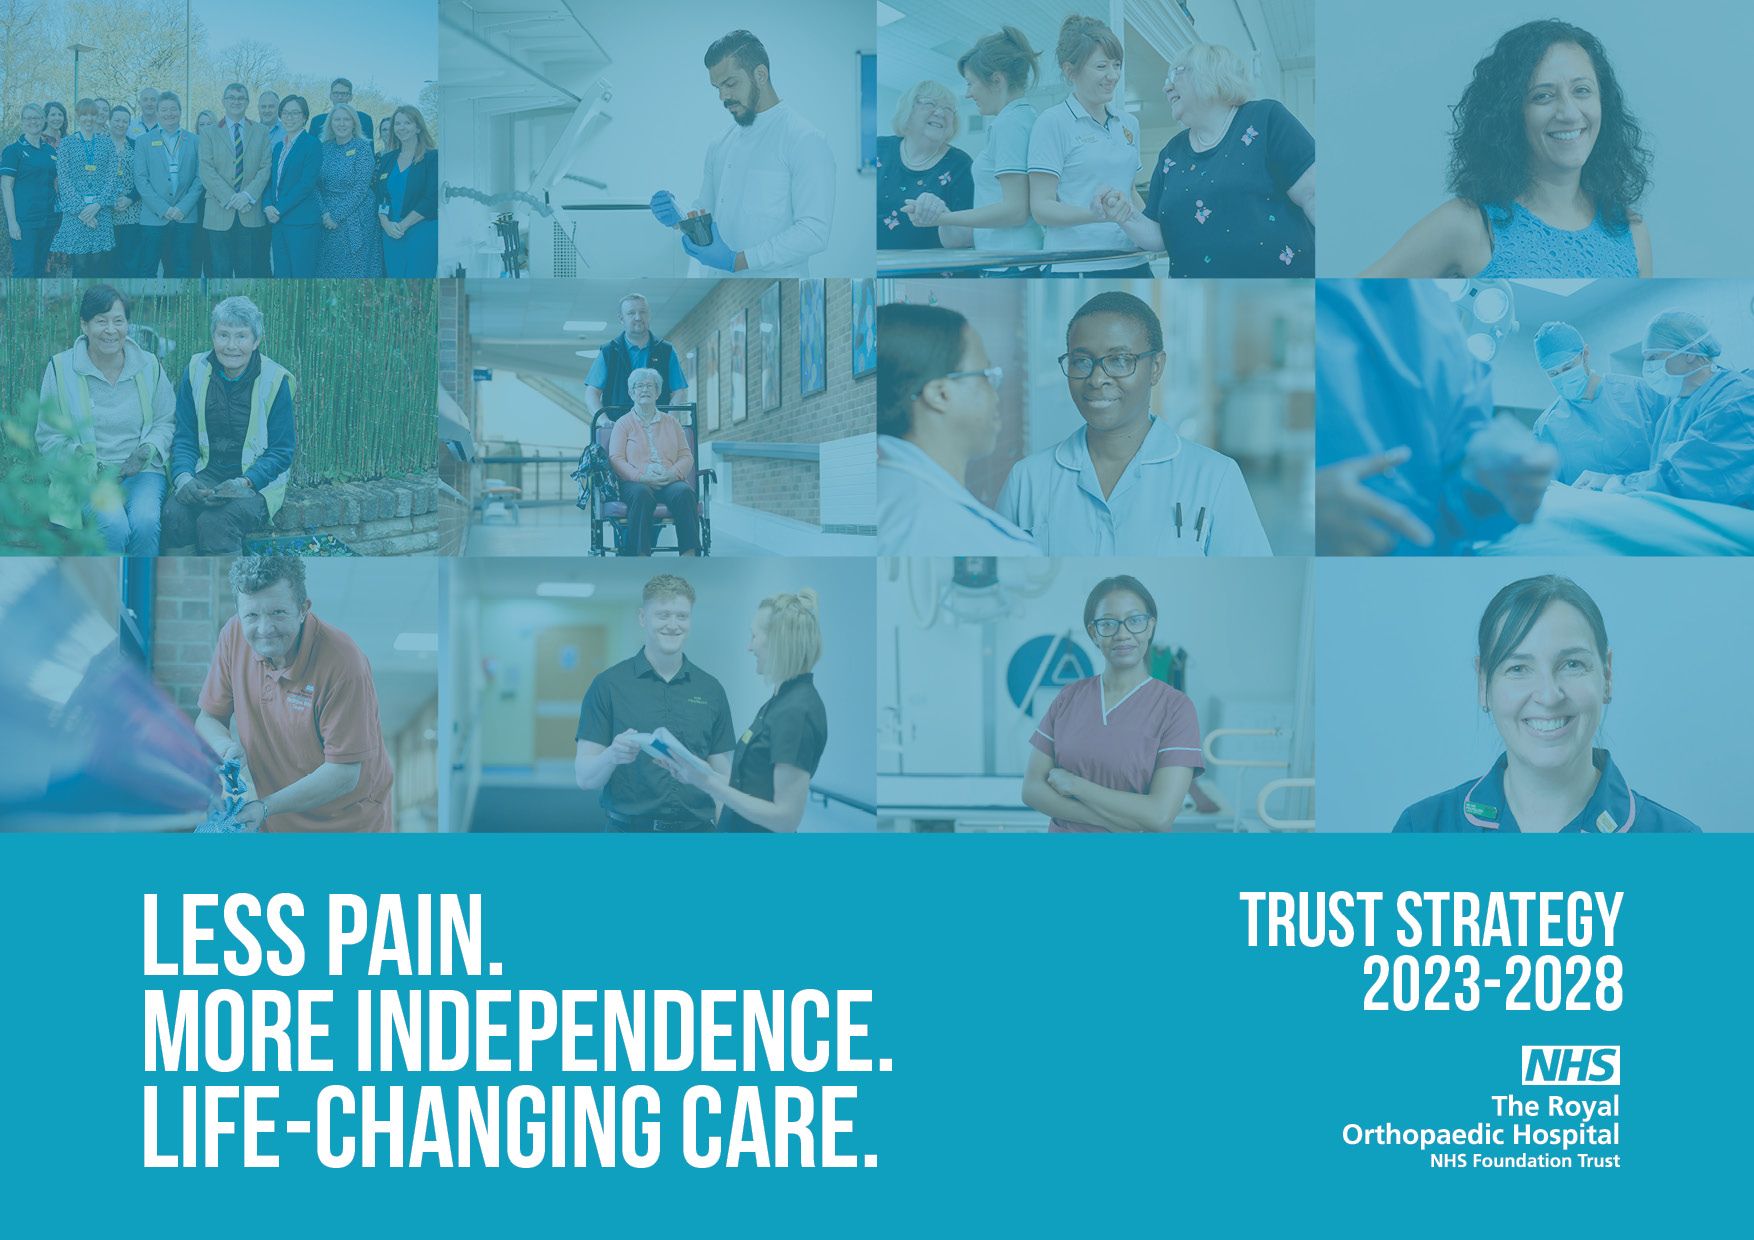 An image of the front cover of our strategy featuring members of staff smiling